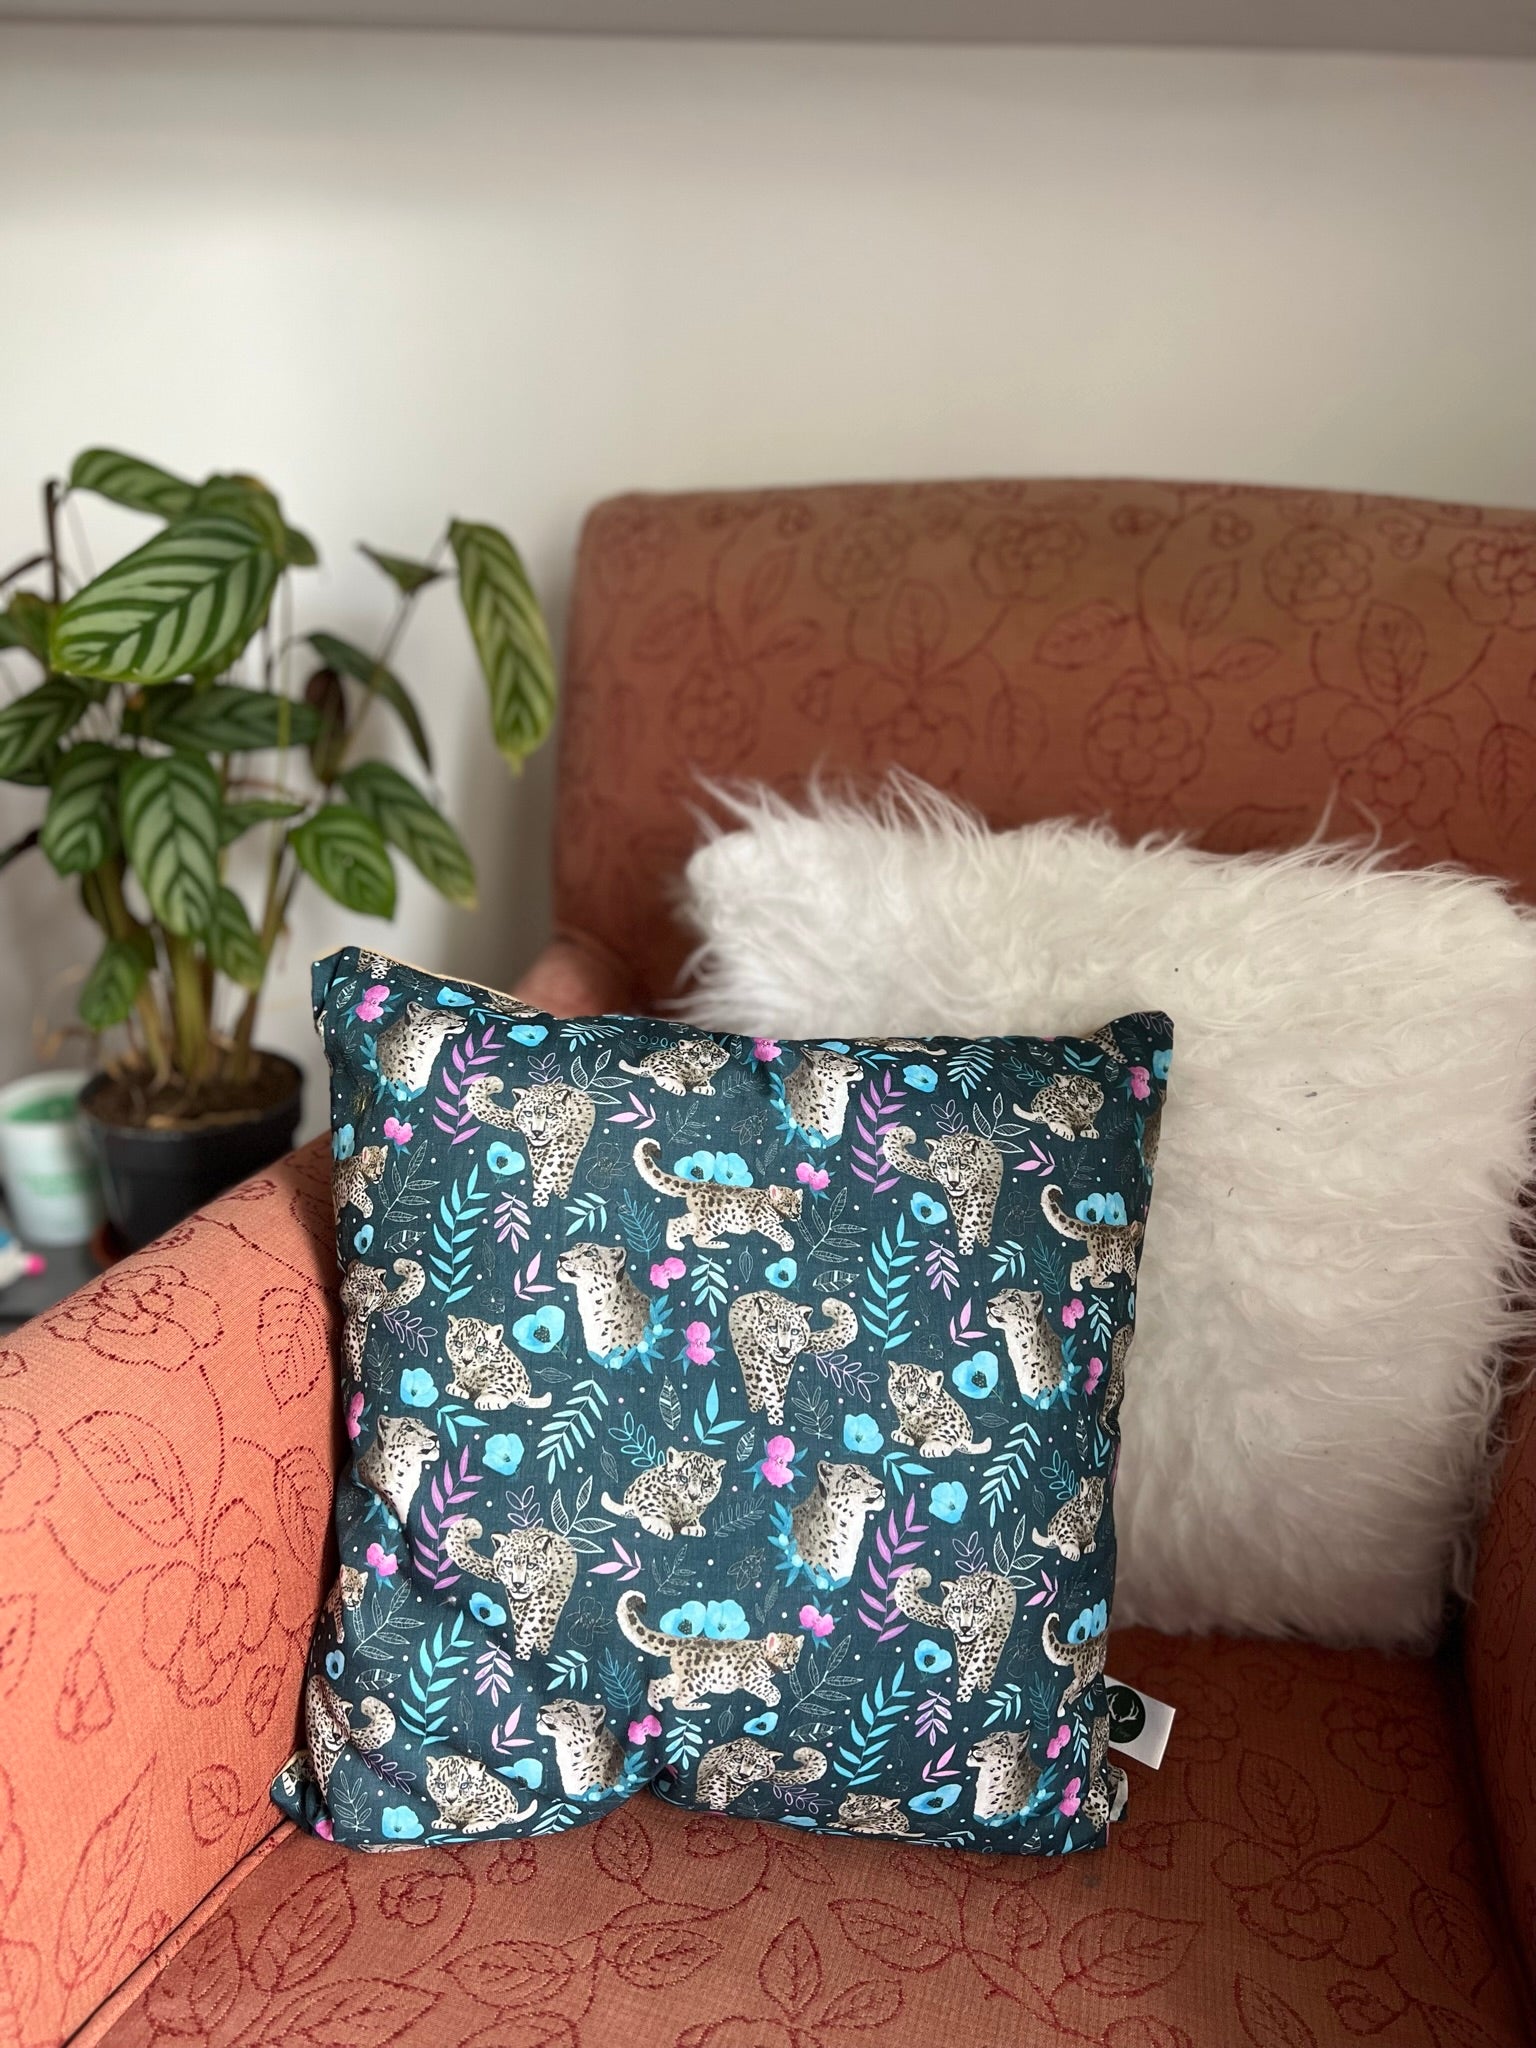 snow leopard cushion on a pink armchair, a great wild animal gift for someone who loves endangered species.